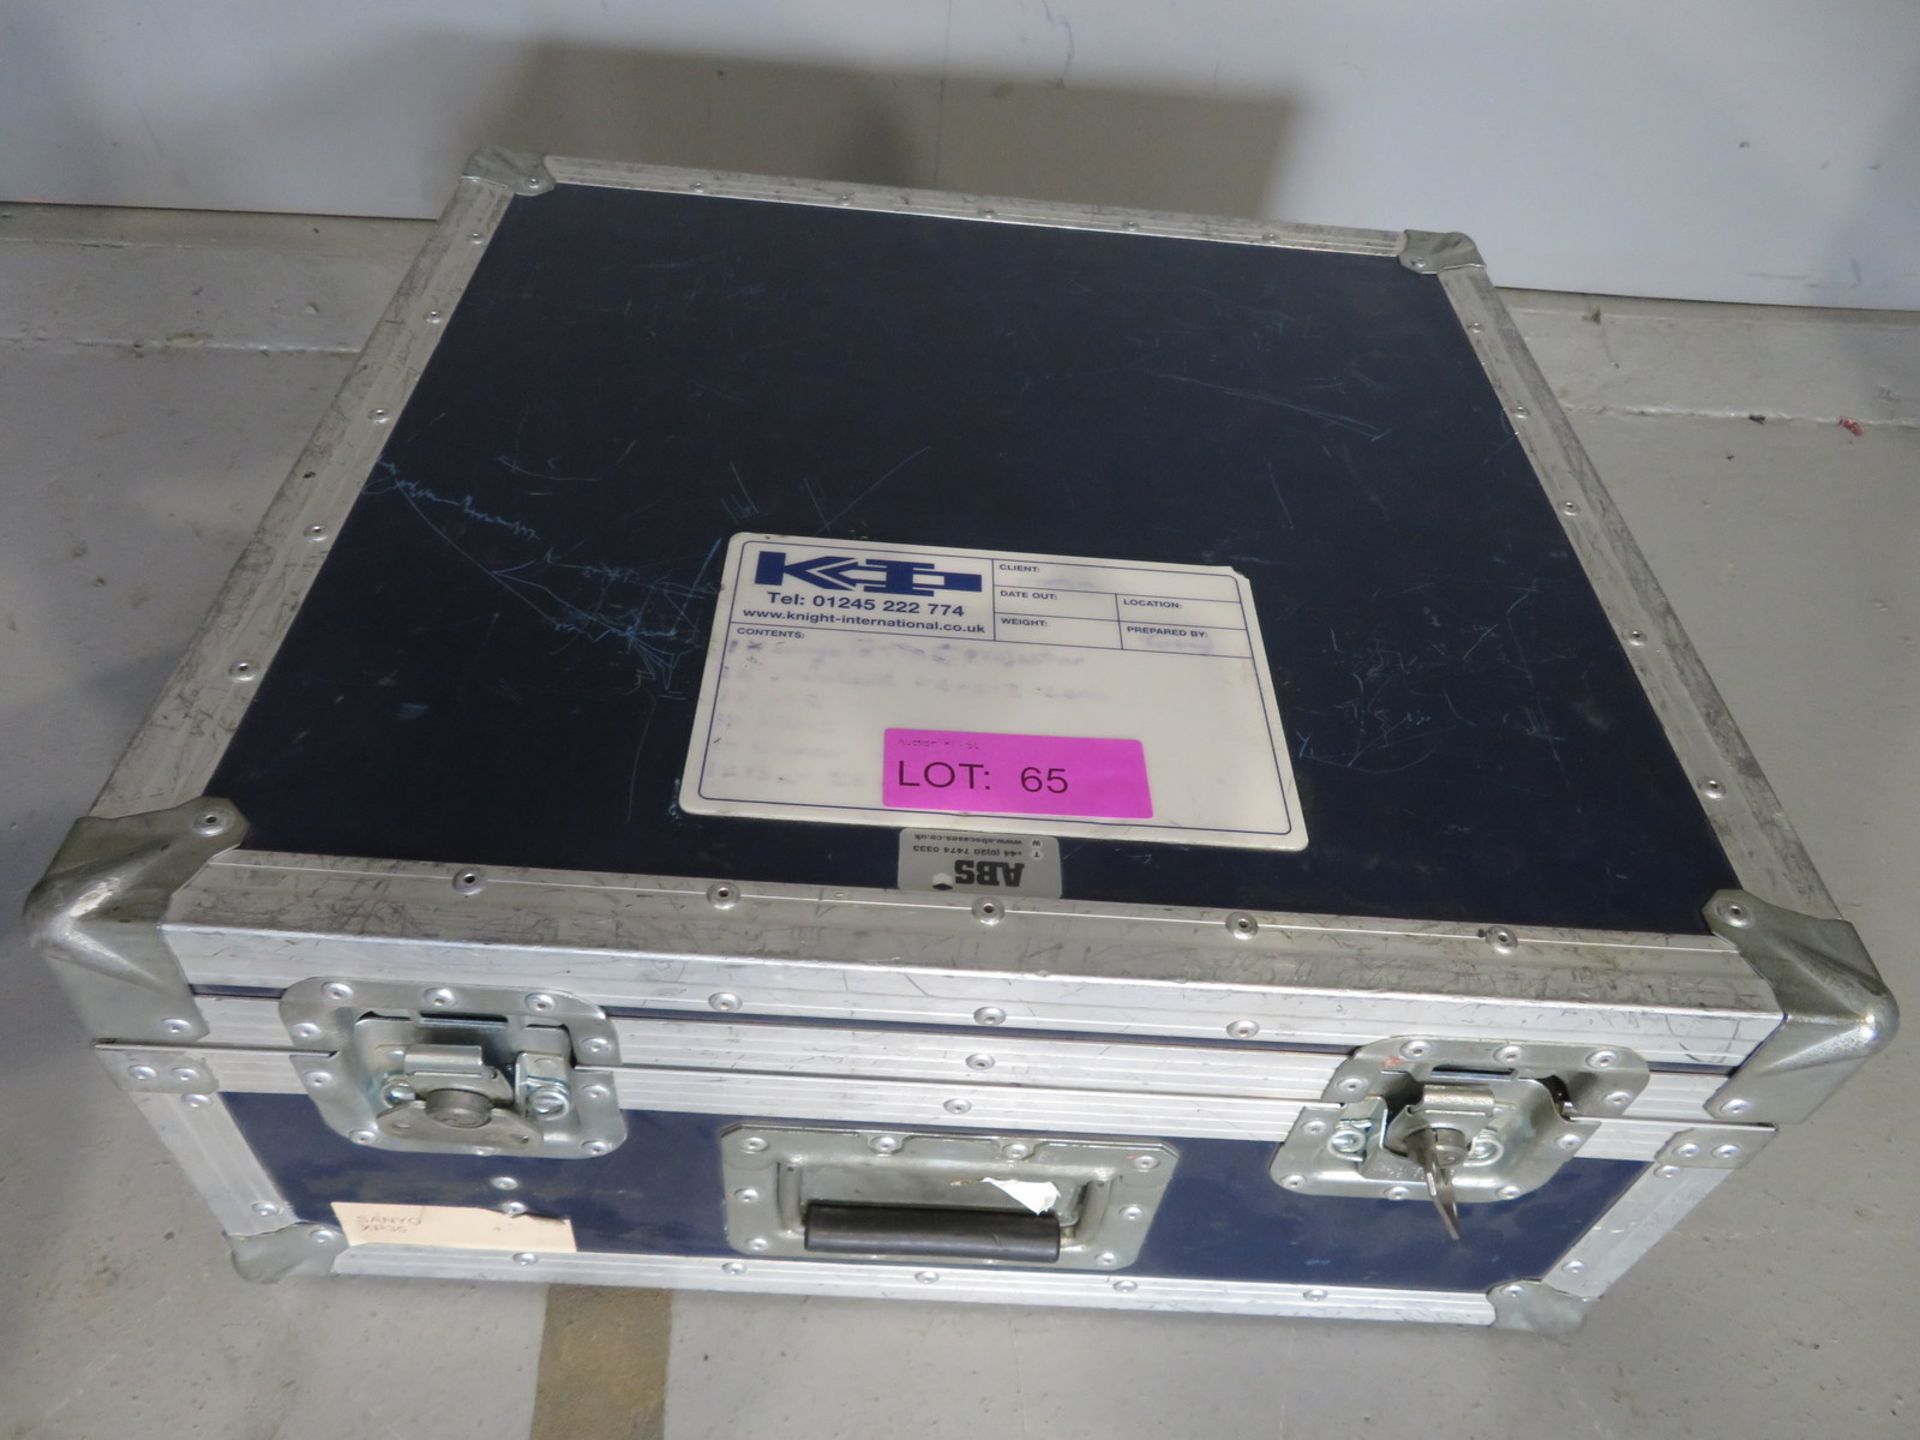 Sanyo XT25 Projector including lens in flightcase. Includes remote. Working condition. - Image 9 of 9